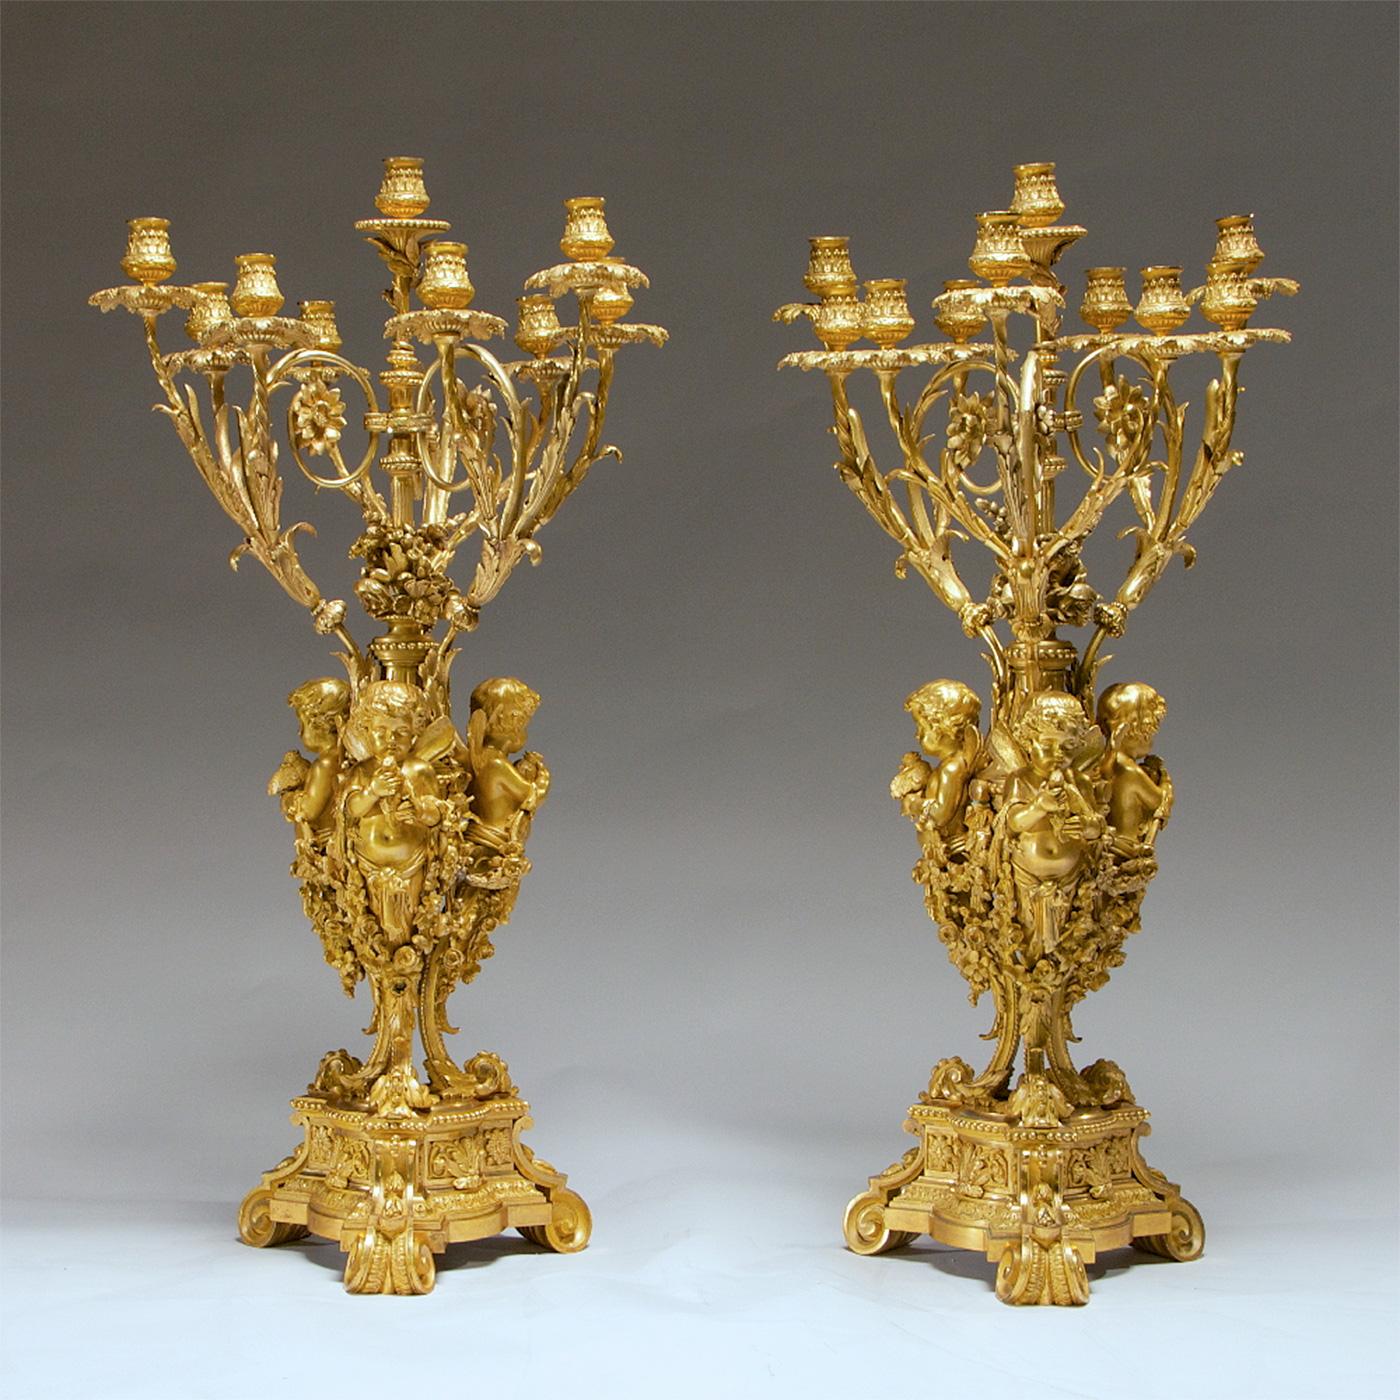 An important pair of French ormolu ten-light candelabra
cast by henry Picard, Paris, third quarter of the 19th century.
Each modeled with three cherub monopodia, holding doves and joined by floral garlands, supporting an Amphora with floral finial